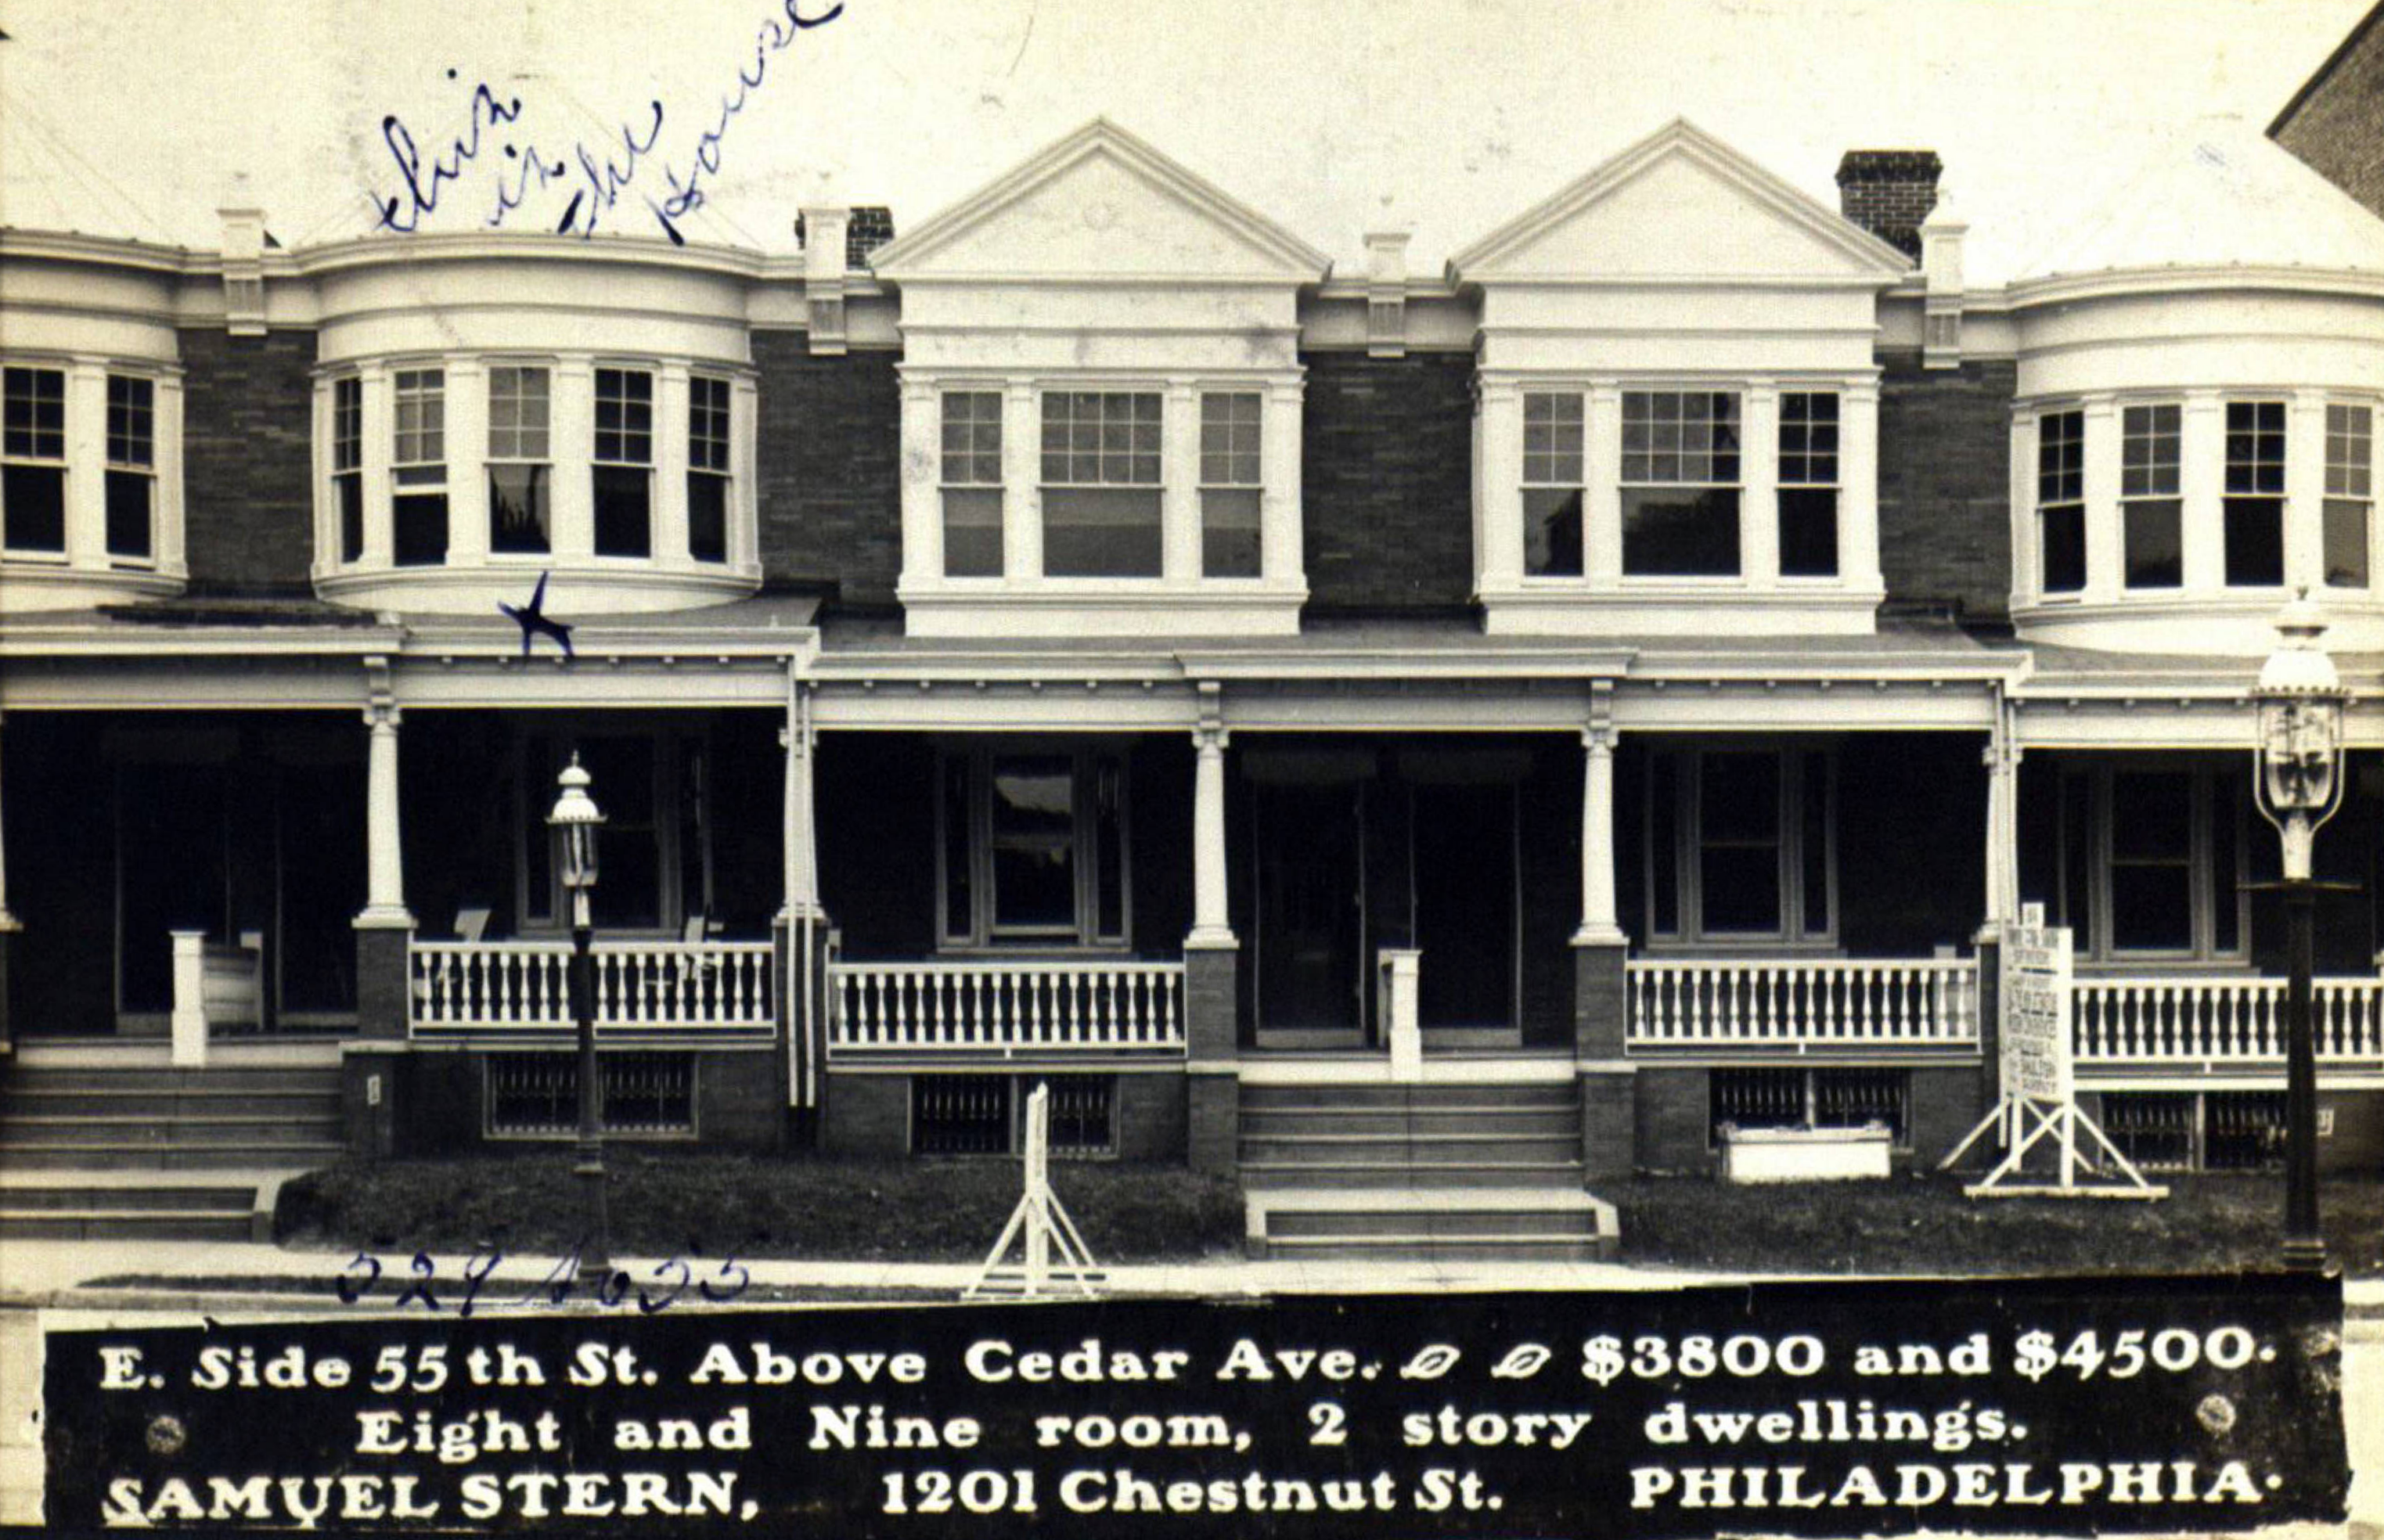 A postcard advertising rowhouses for sale in 1914, just two years before Philadelphia experienced a severe housing crisis.